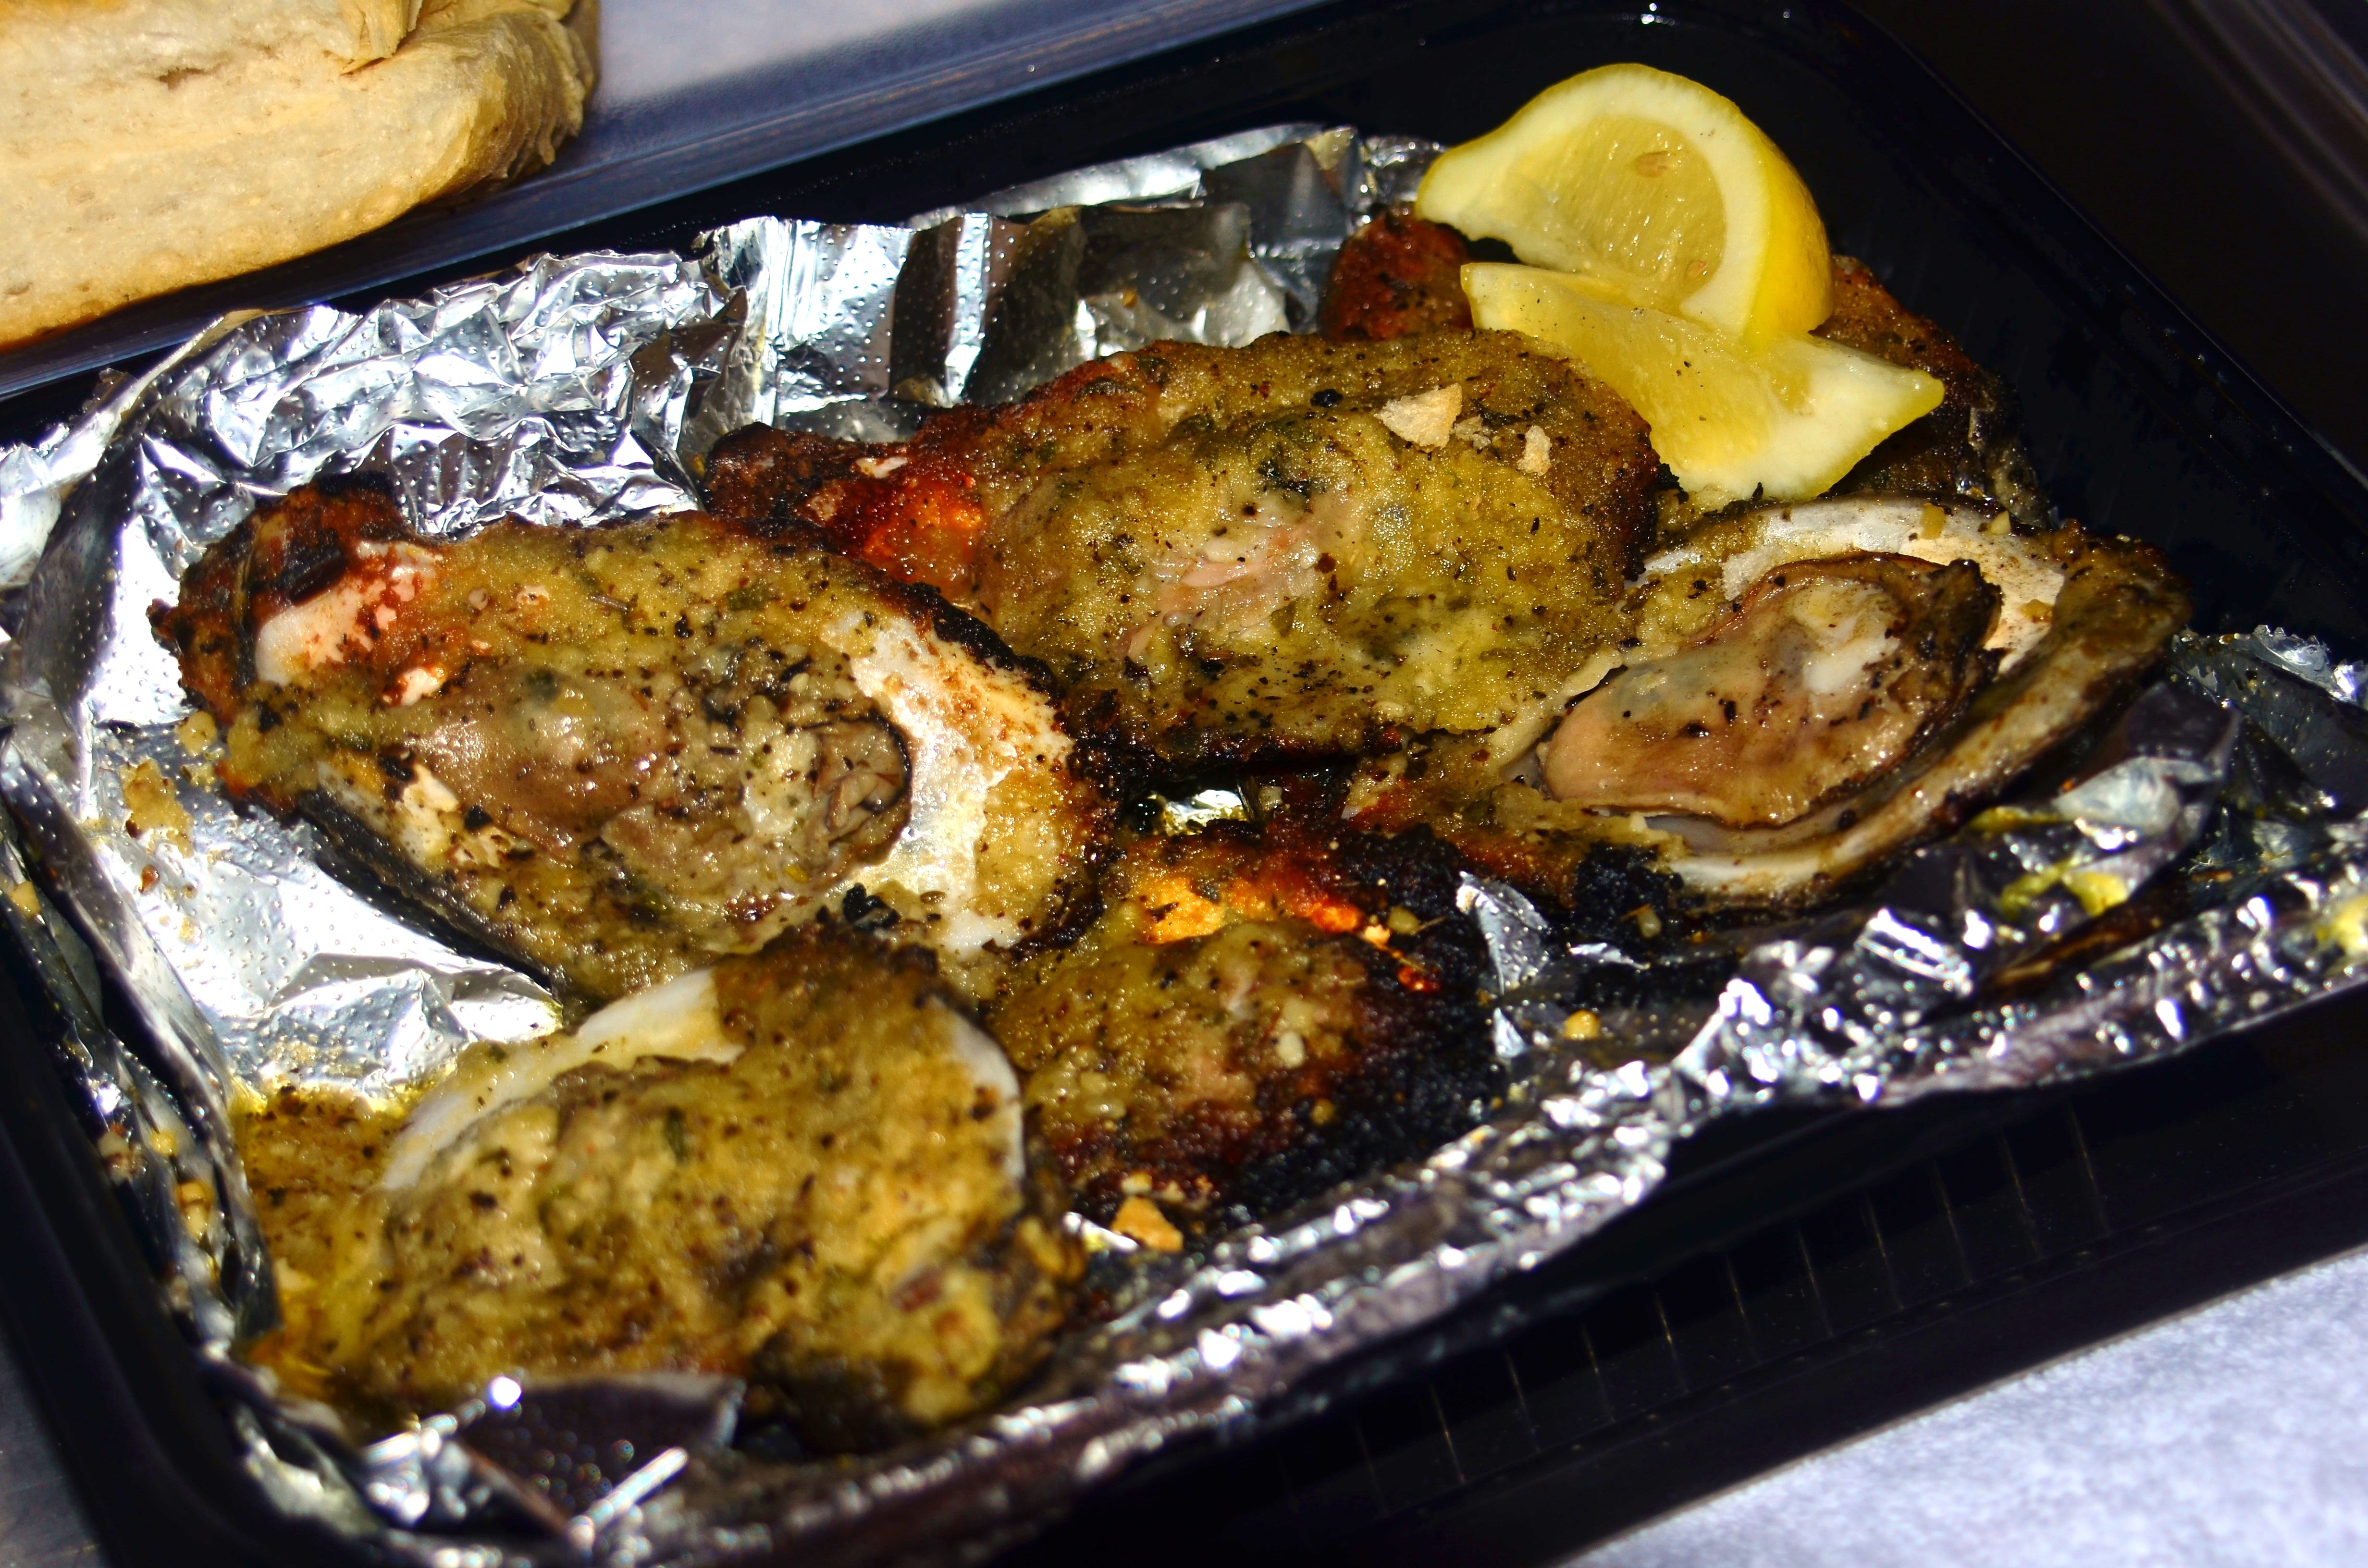 Charbroiled oysters to go